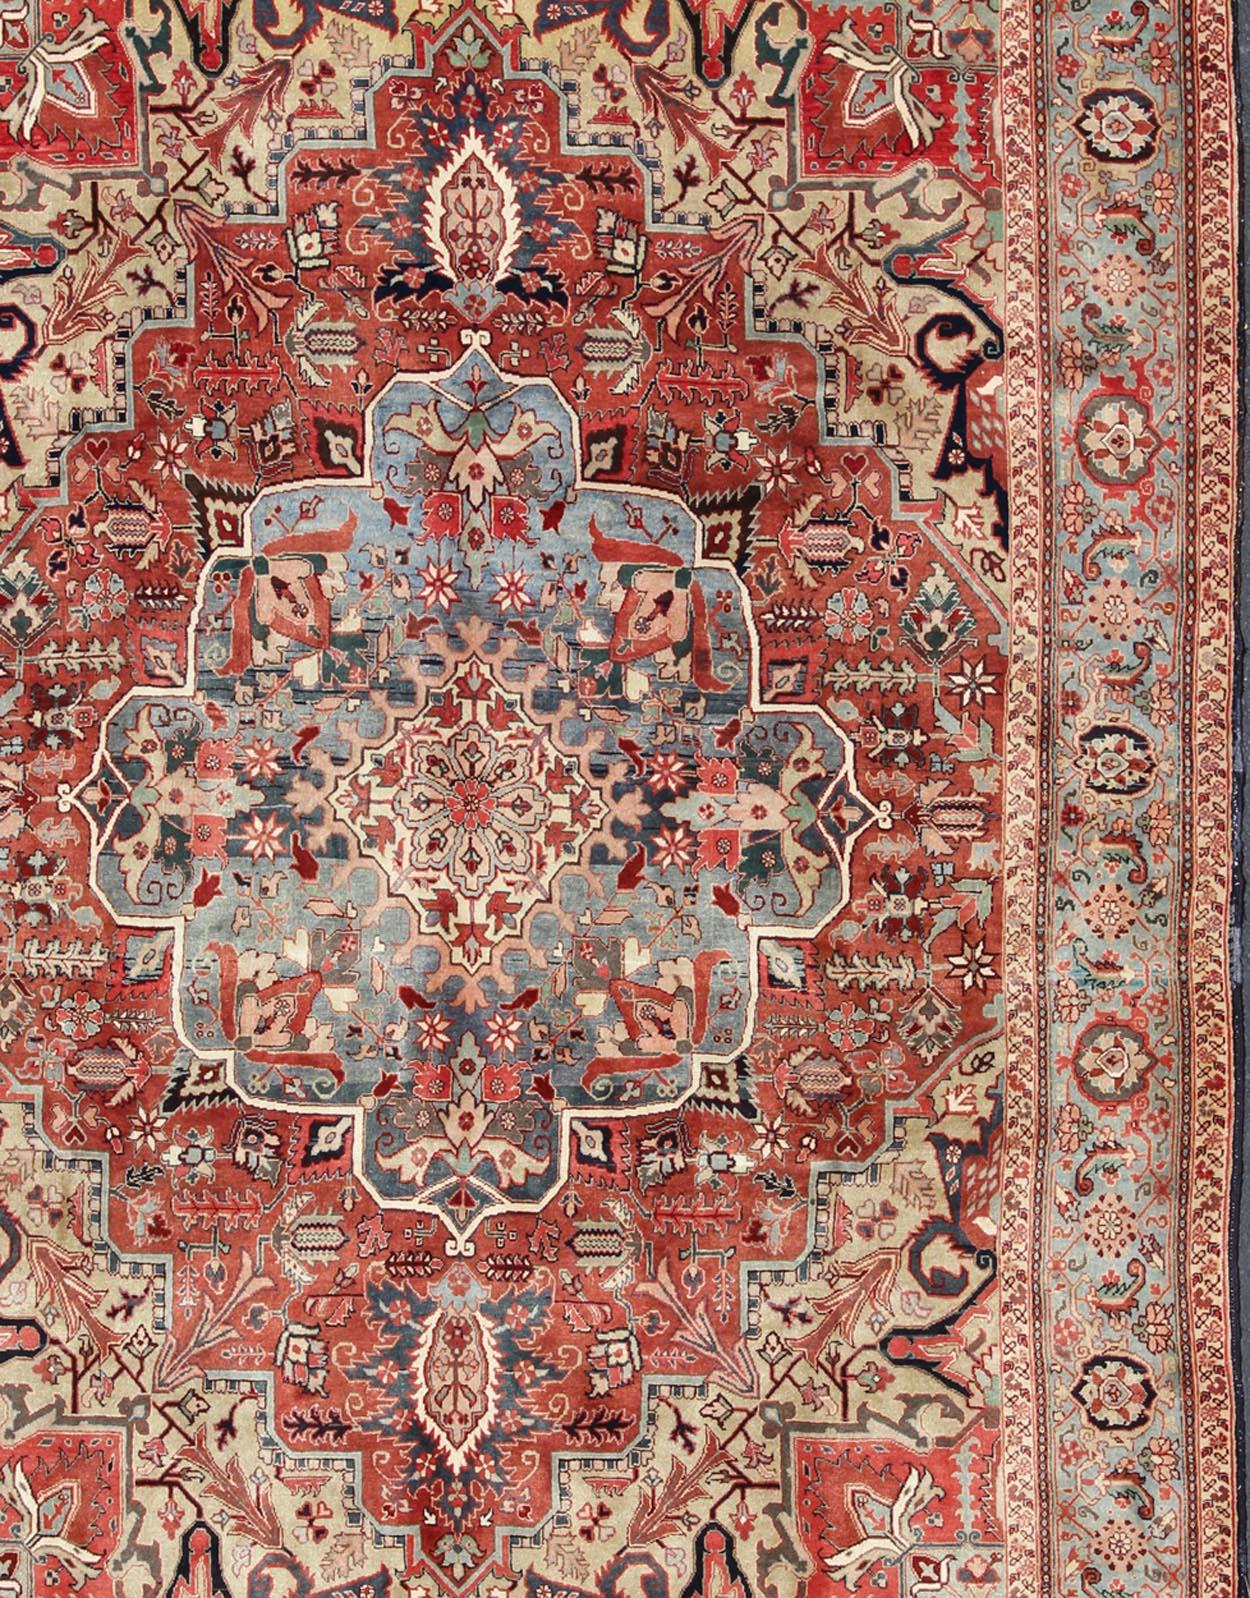 Large Heriz-Serapi Vintage Persian Rug with Geometric Design in Rust Red, Light Blue, yellow, and Multi colors. Keivan Woven Arts/ Rug/ BN, Country/type/ Persian Rug, Serapi Heriz

 Measures: 9'6 x 13'1 
 
In excellent condition, this exquisite